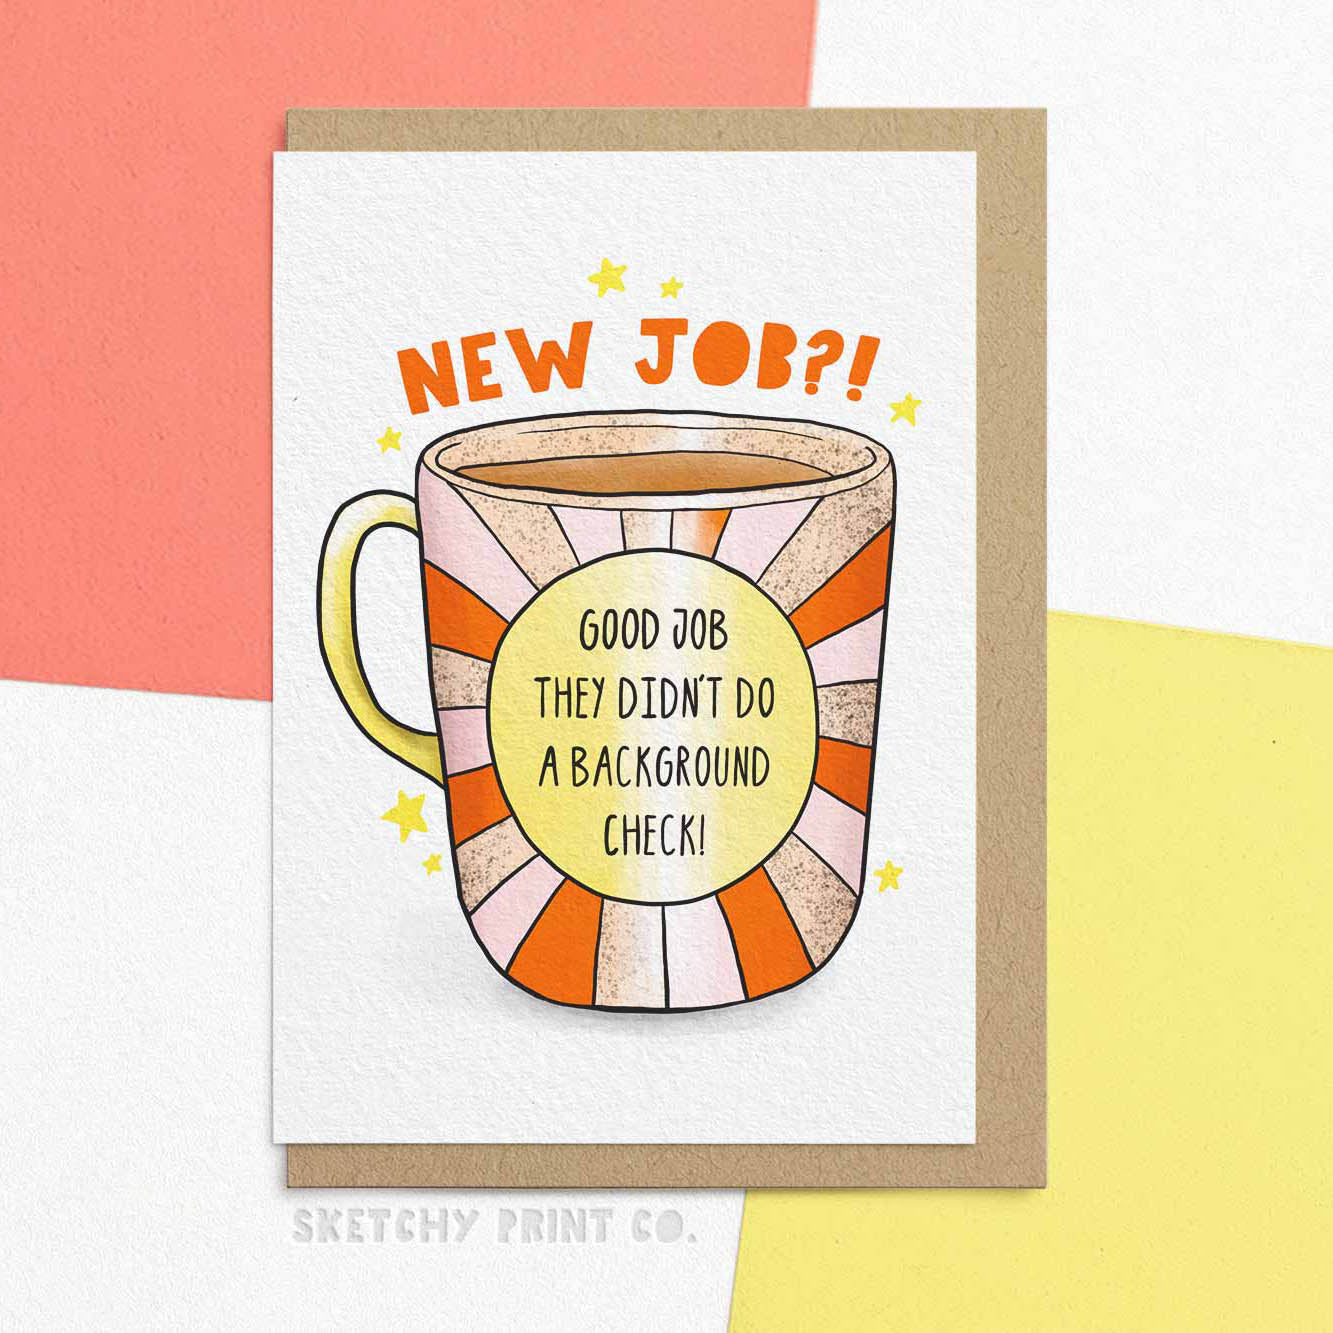 Background Check Funny Rude Silly New Job Cards Leaving Work Wife unique gift unusual hilarious illustrated sketchy print co